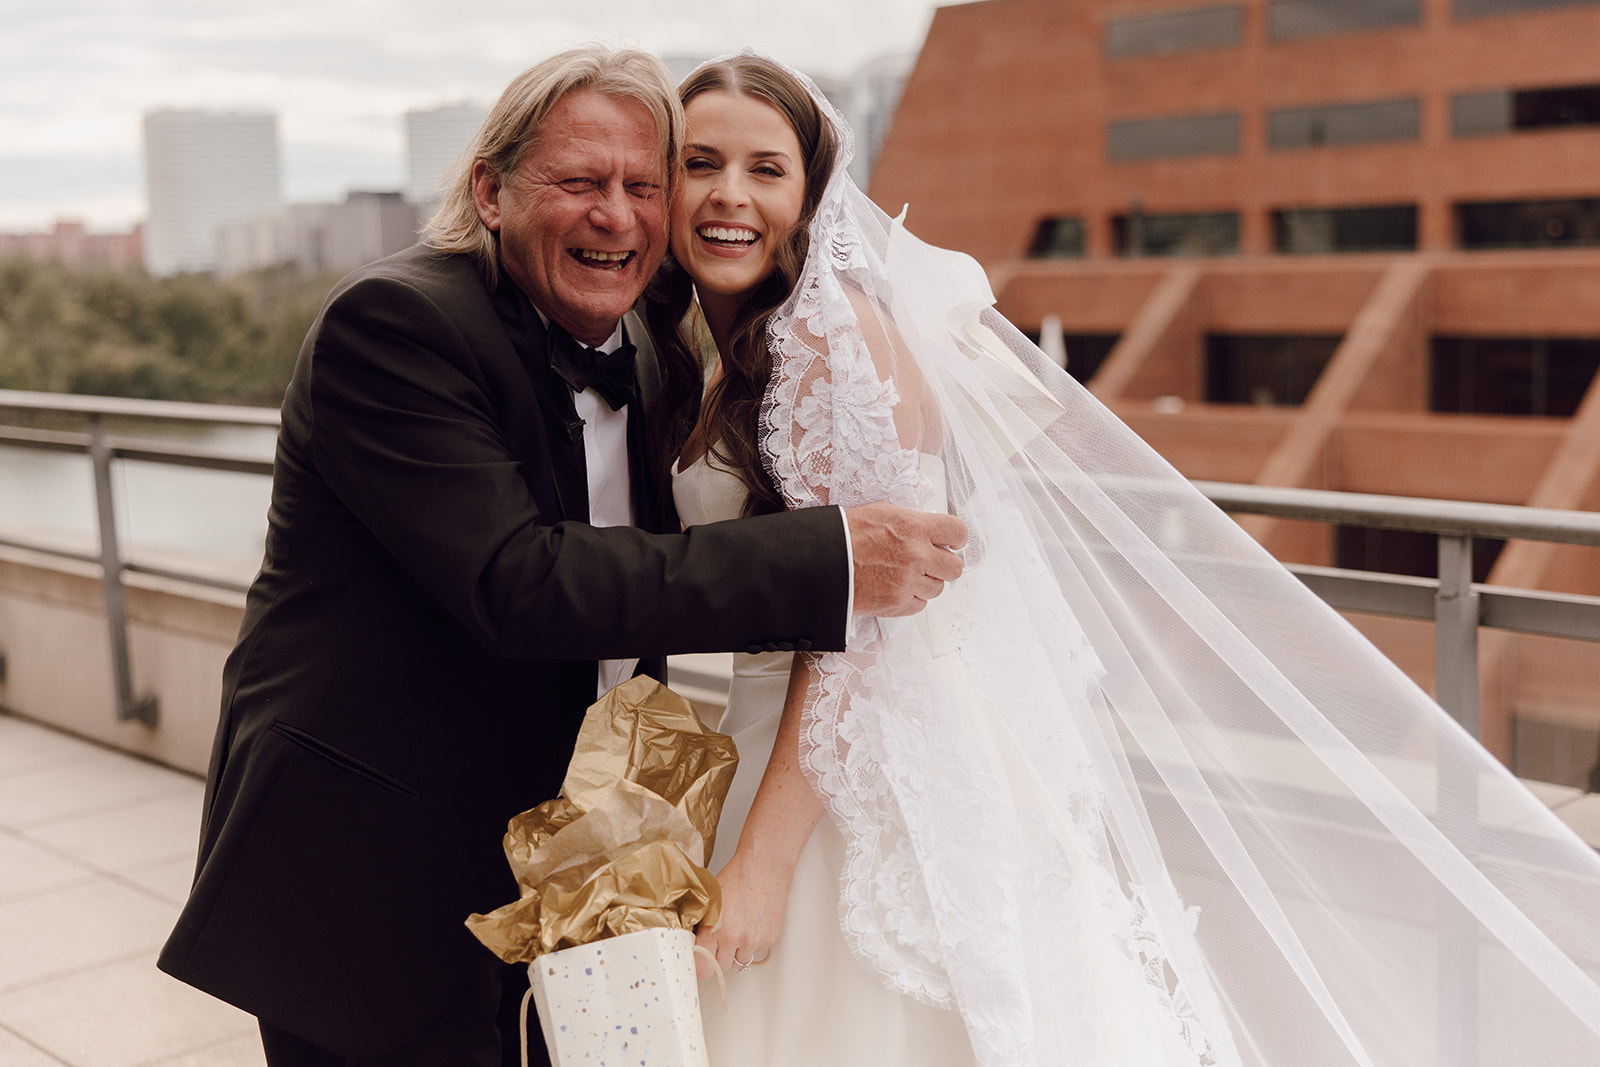 the bride laughing with her dad at their first look